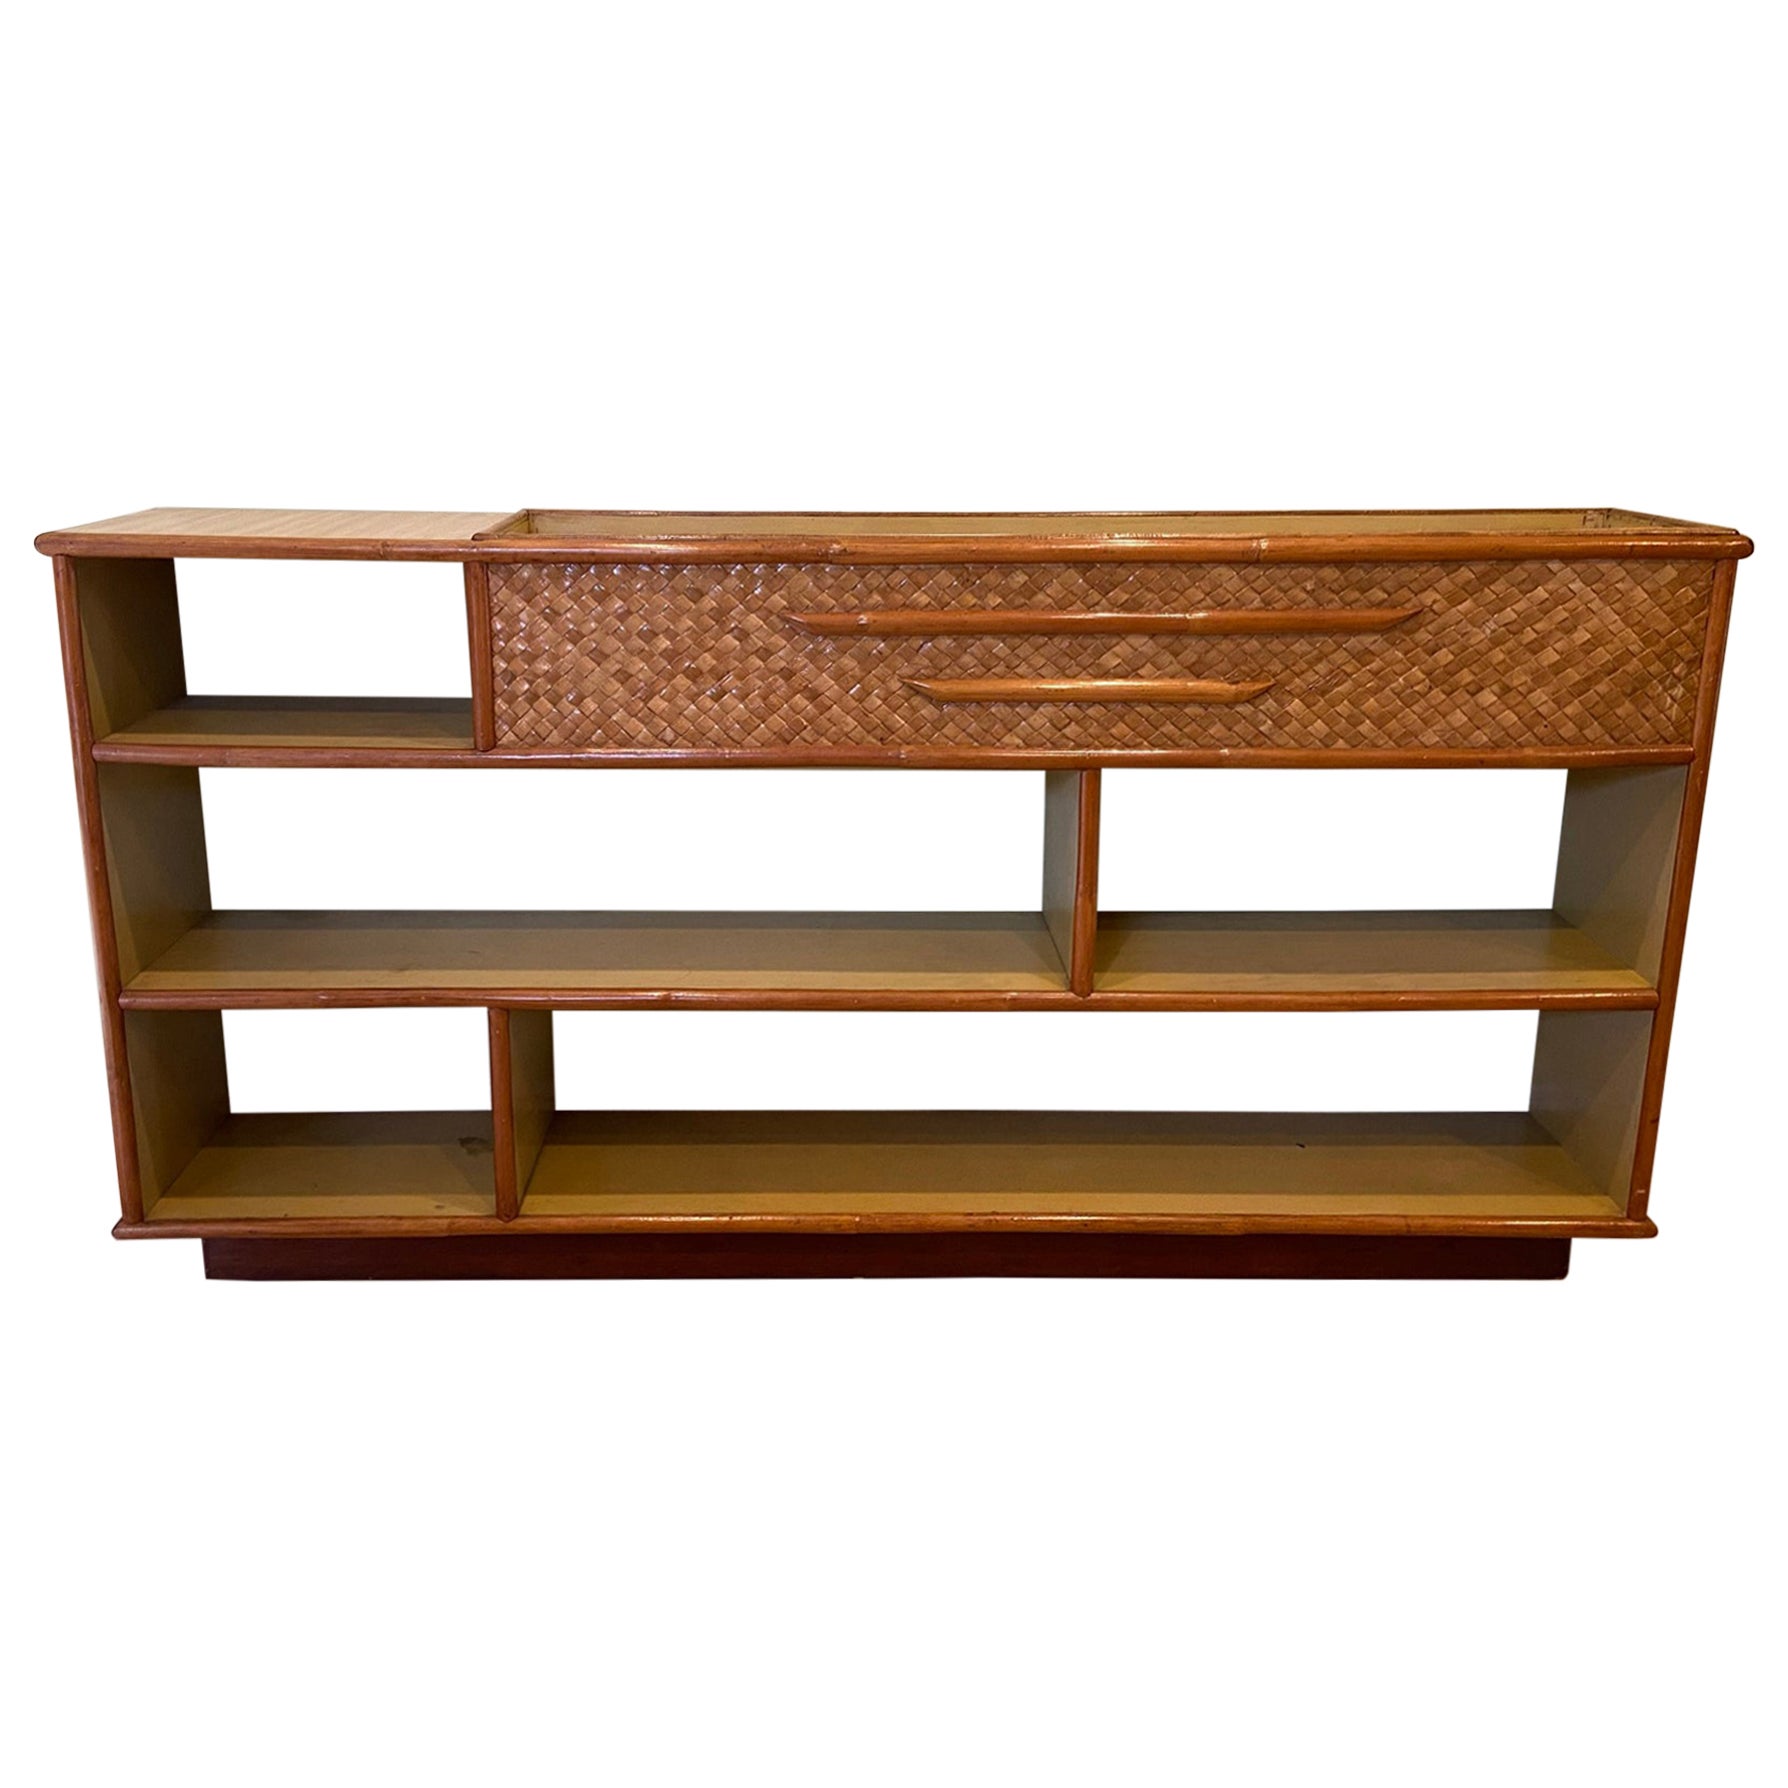 Vintage Rattan Shelf Display Unit with Built in Planter Room Divider Circa 1950s For Sale